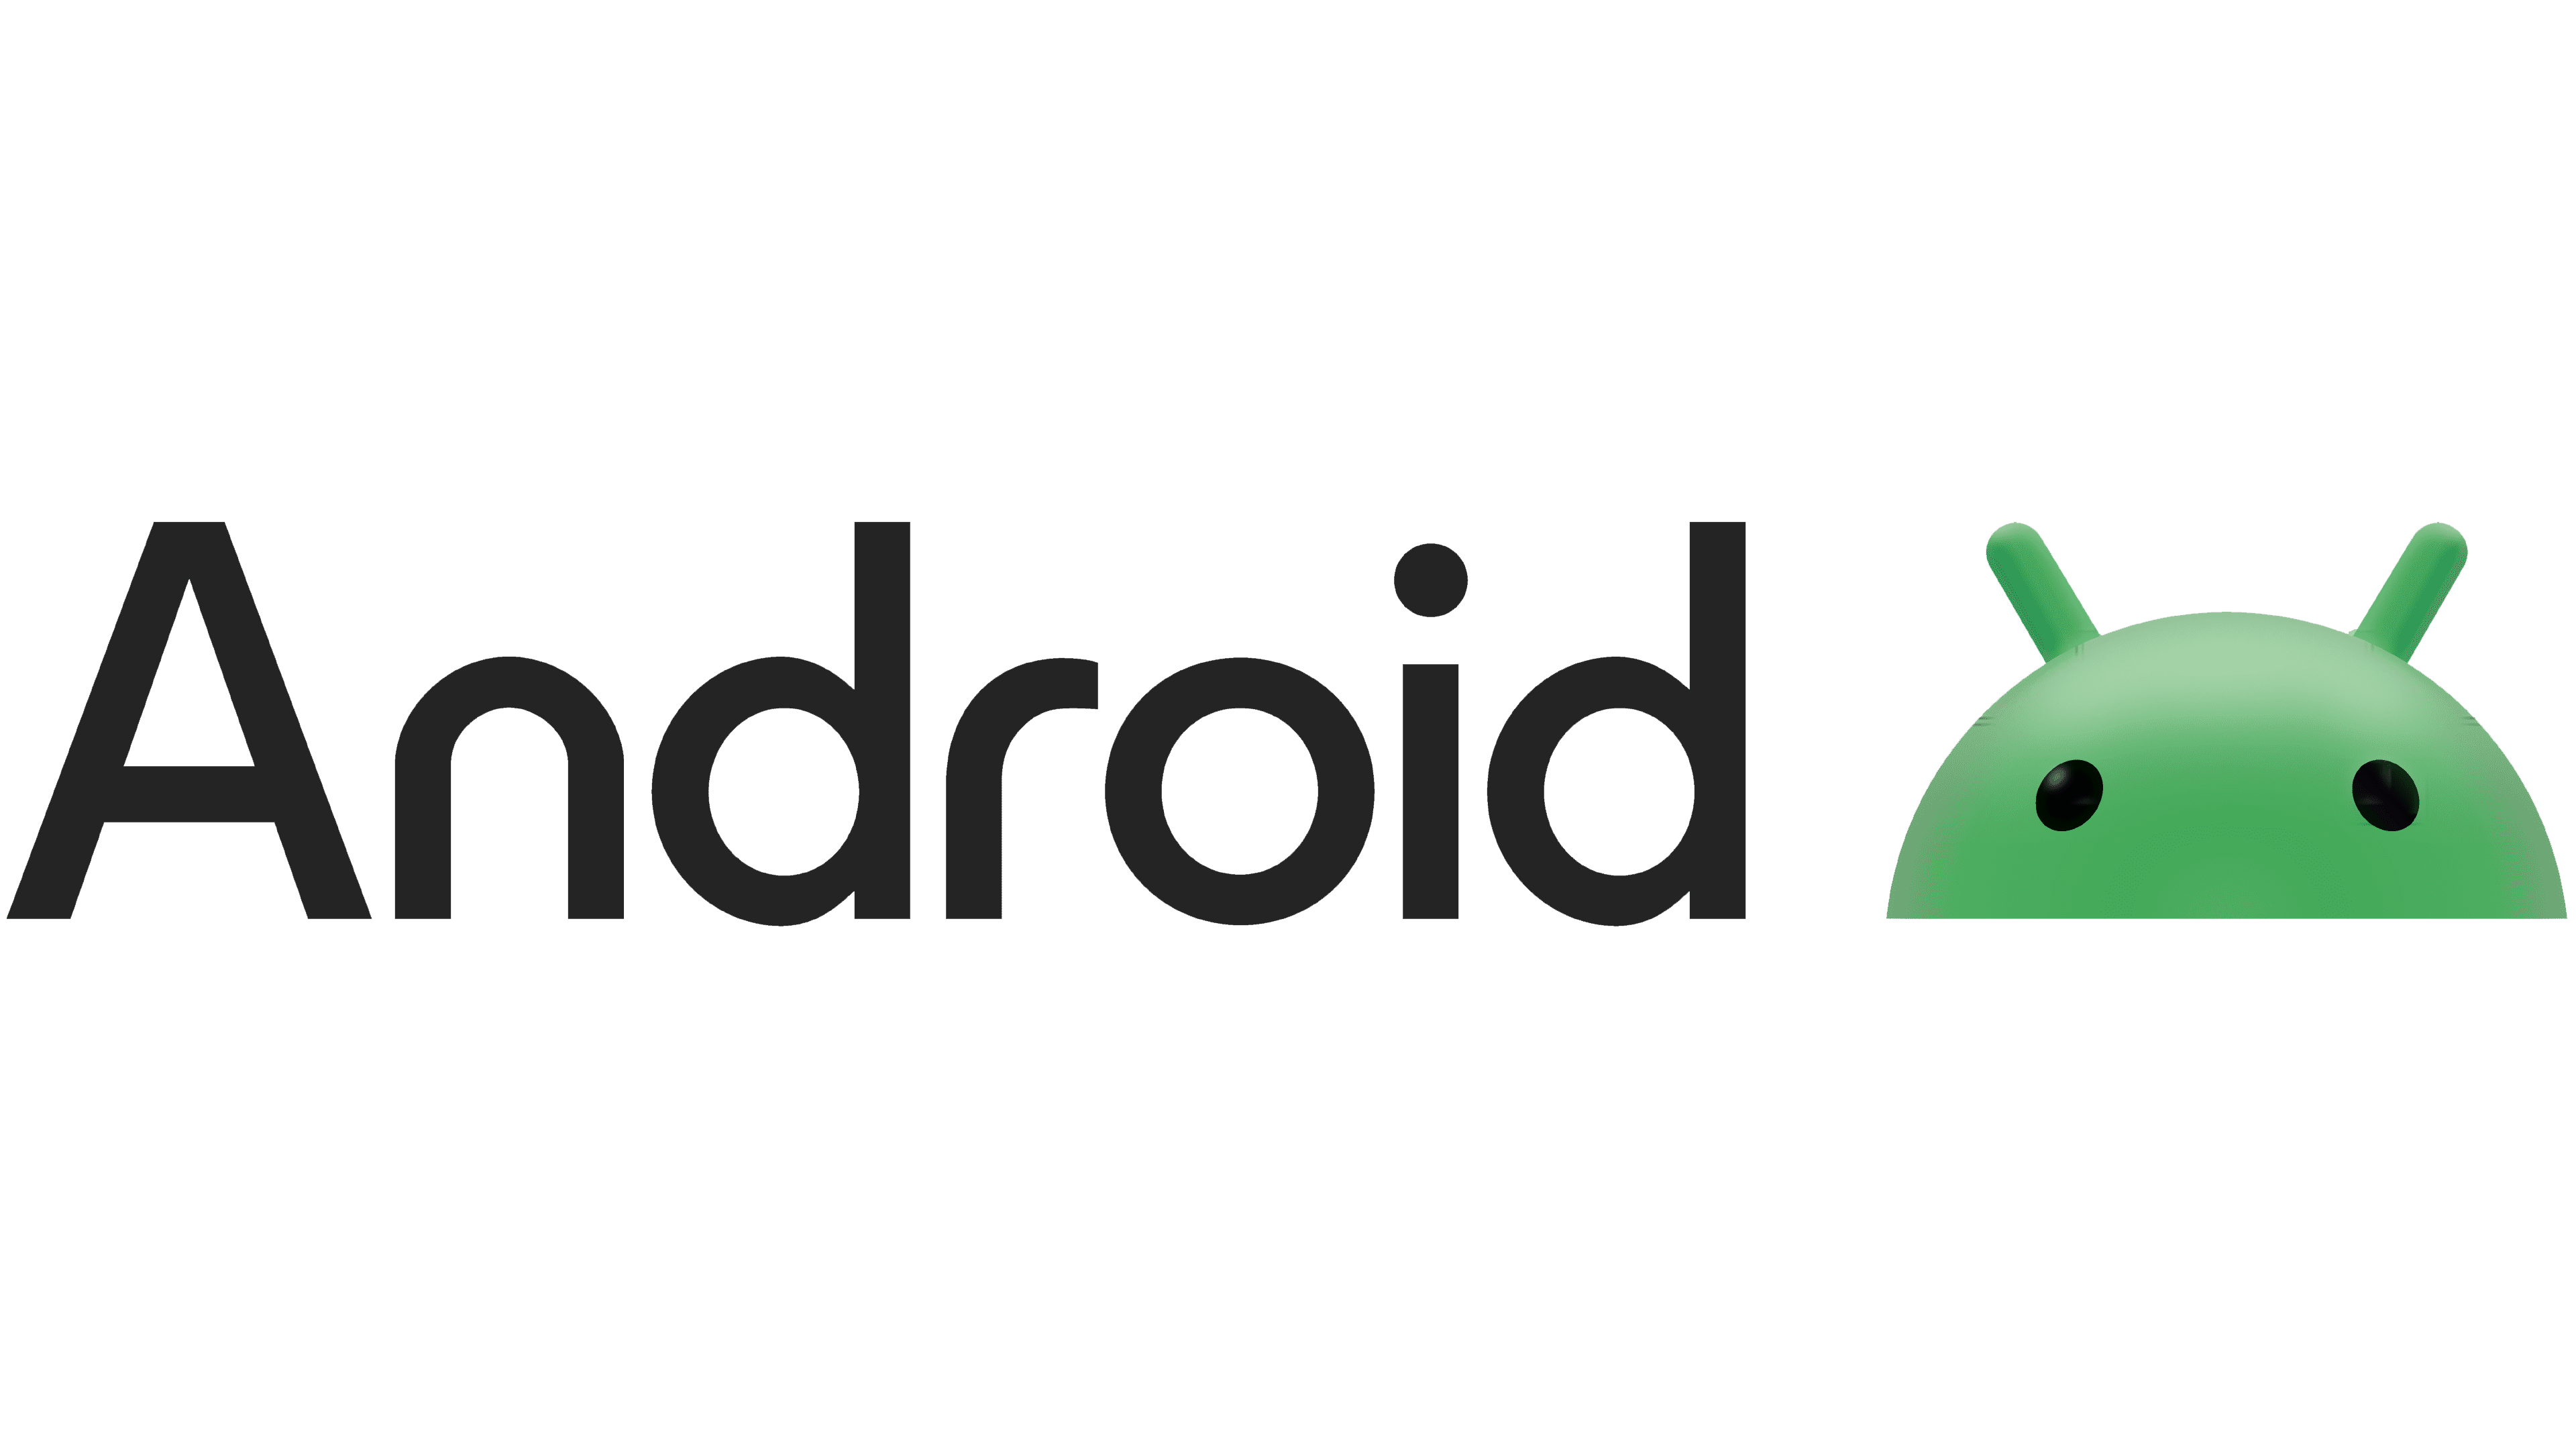 droid logo and name